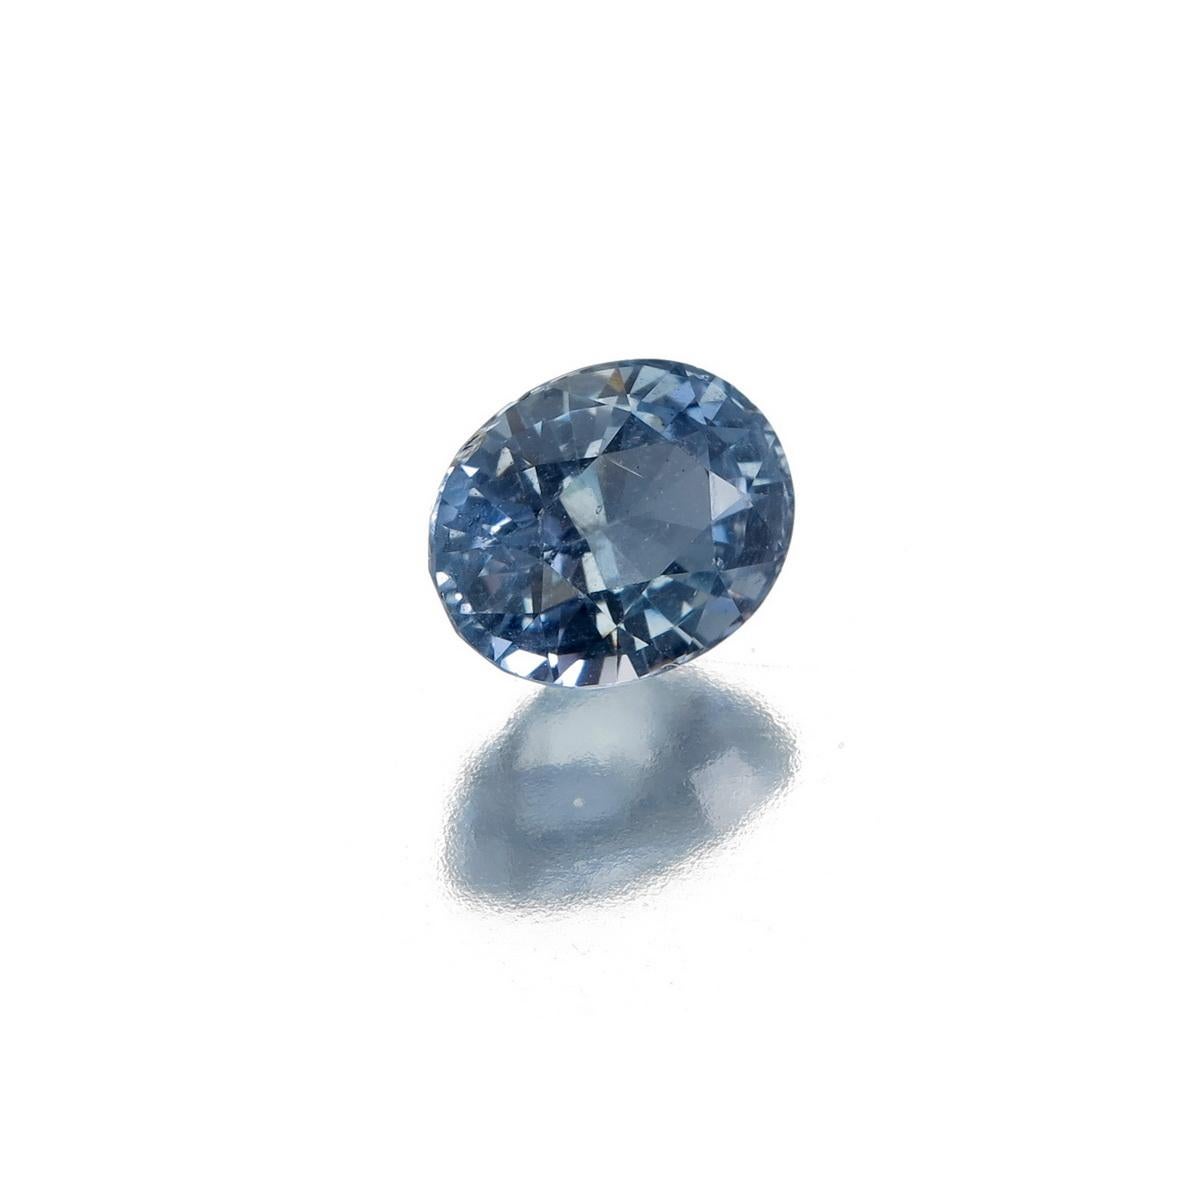 GIL Certified 1.79 Carat Cobalt Blue Natural Spinel from Burma
Dimension: 7.84 x 6.32 x 4.59 mm
Weight: 1.79 Carat
Cut: Oval
No Heat